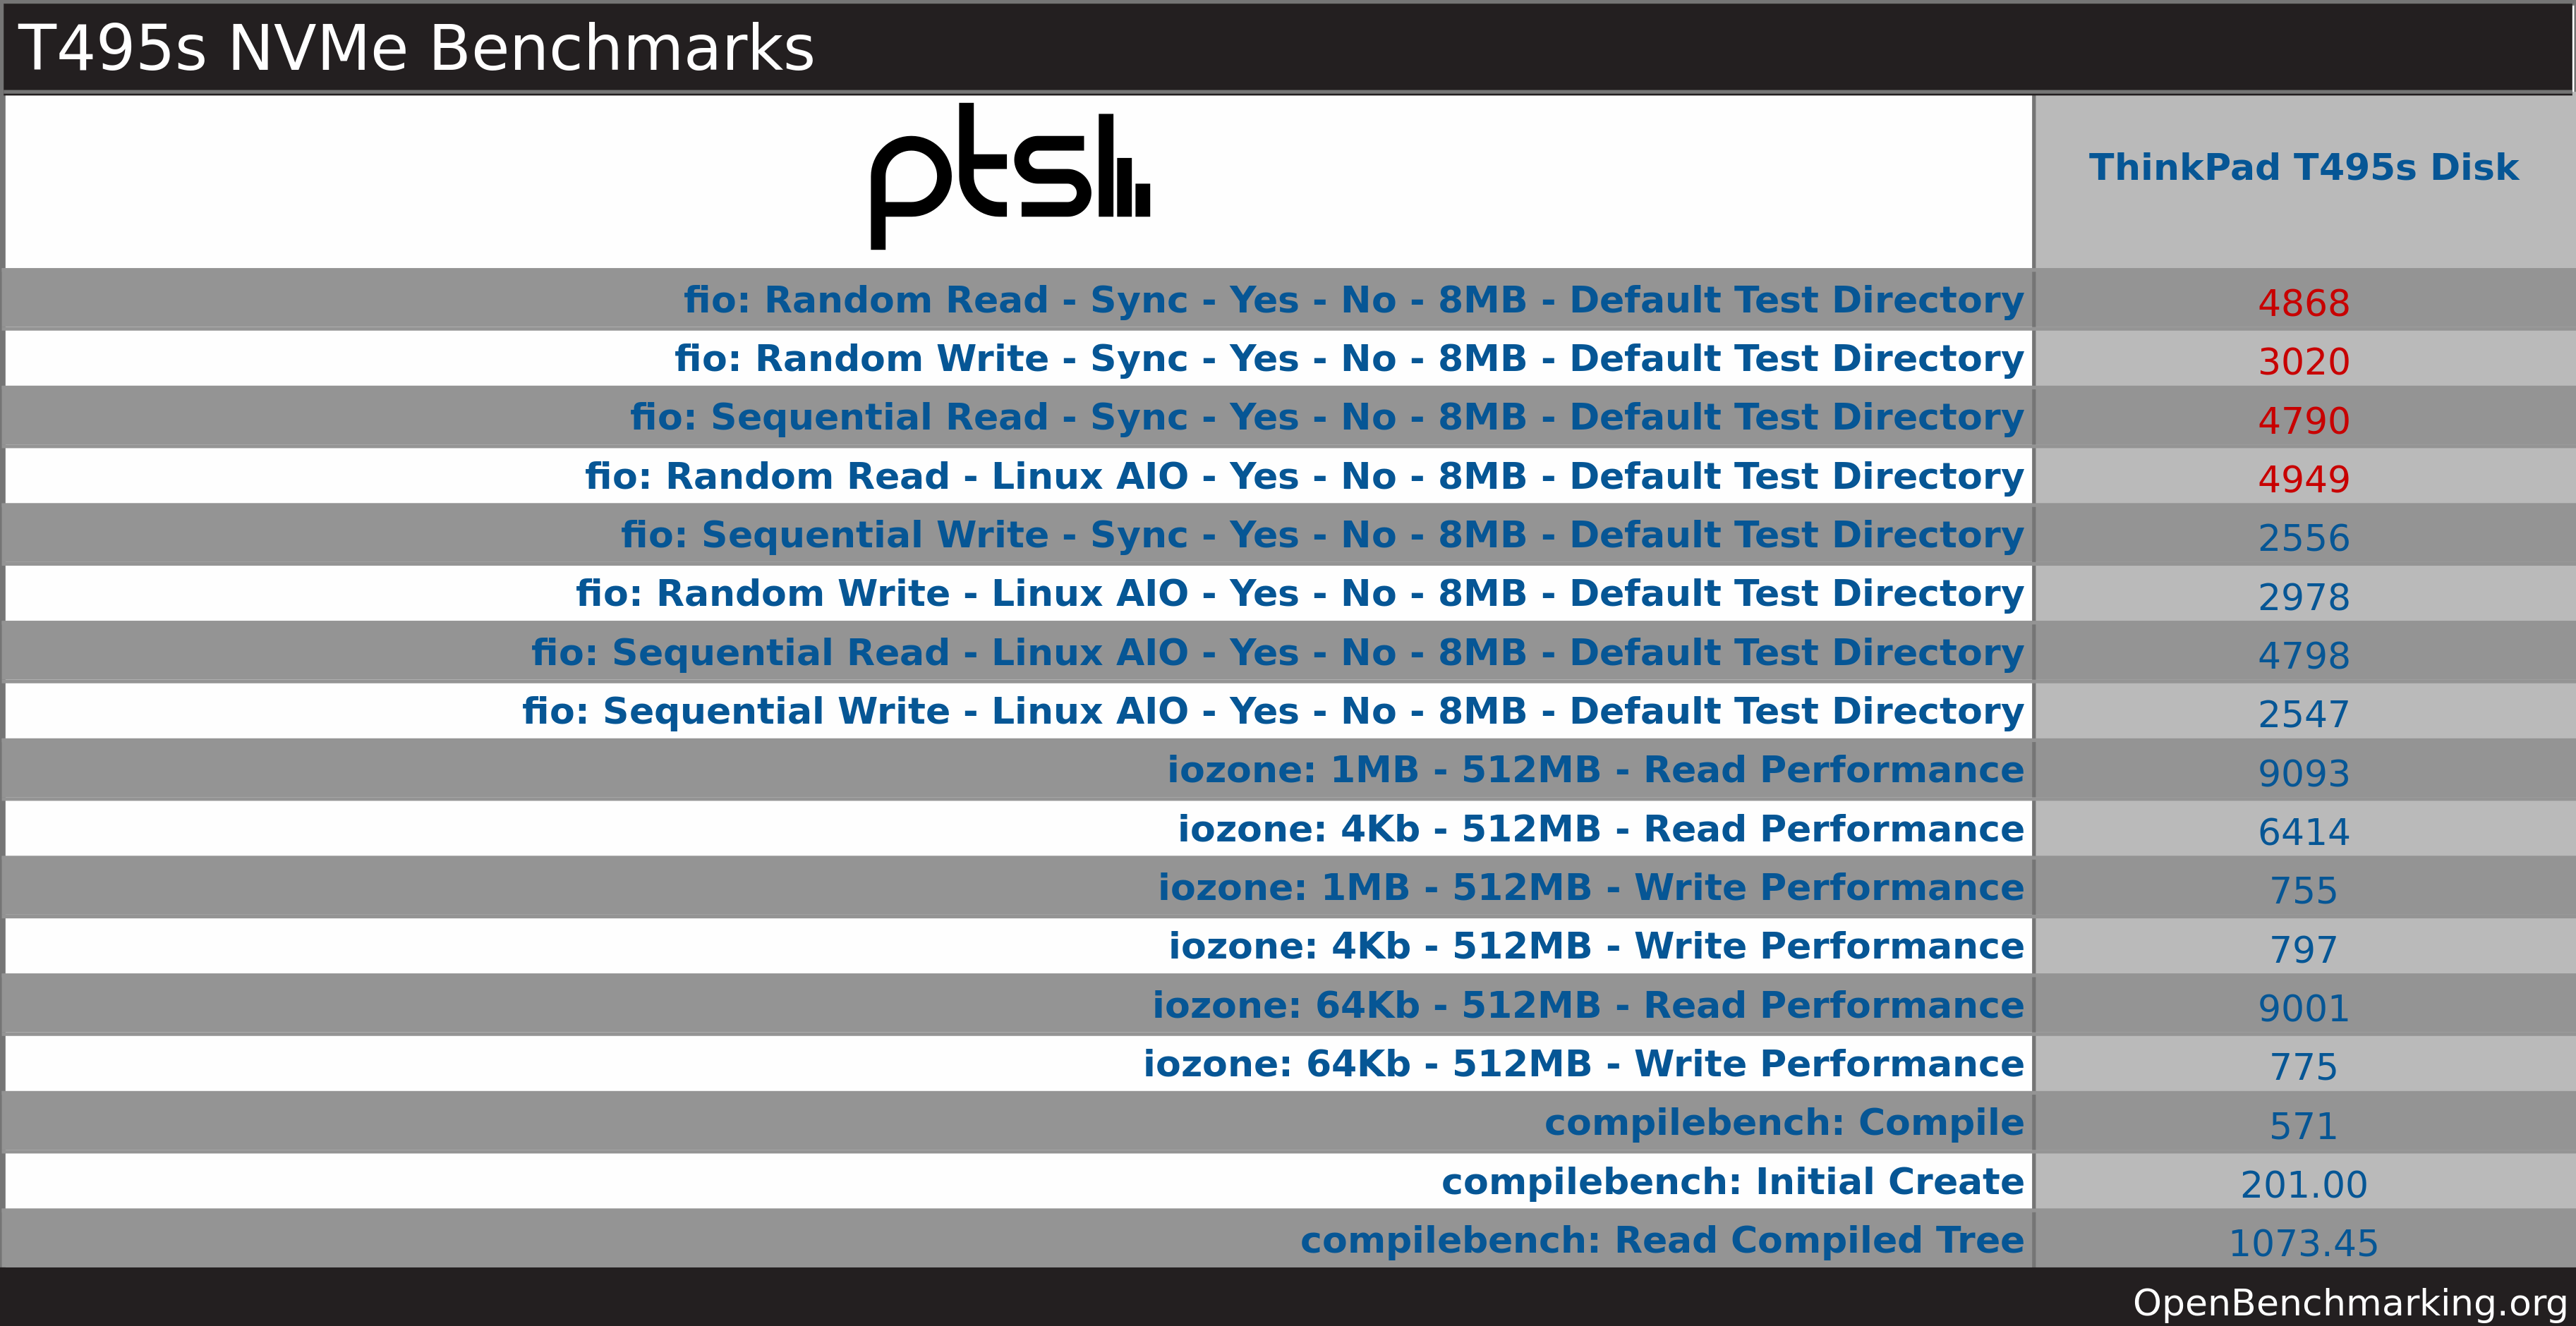 Disk Benchmark Overview